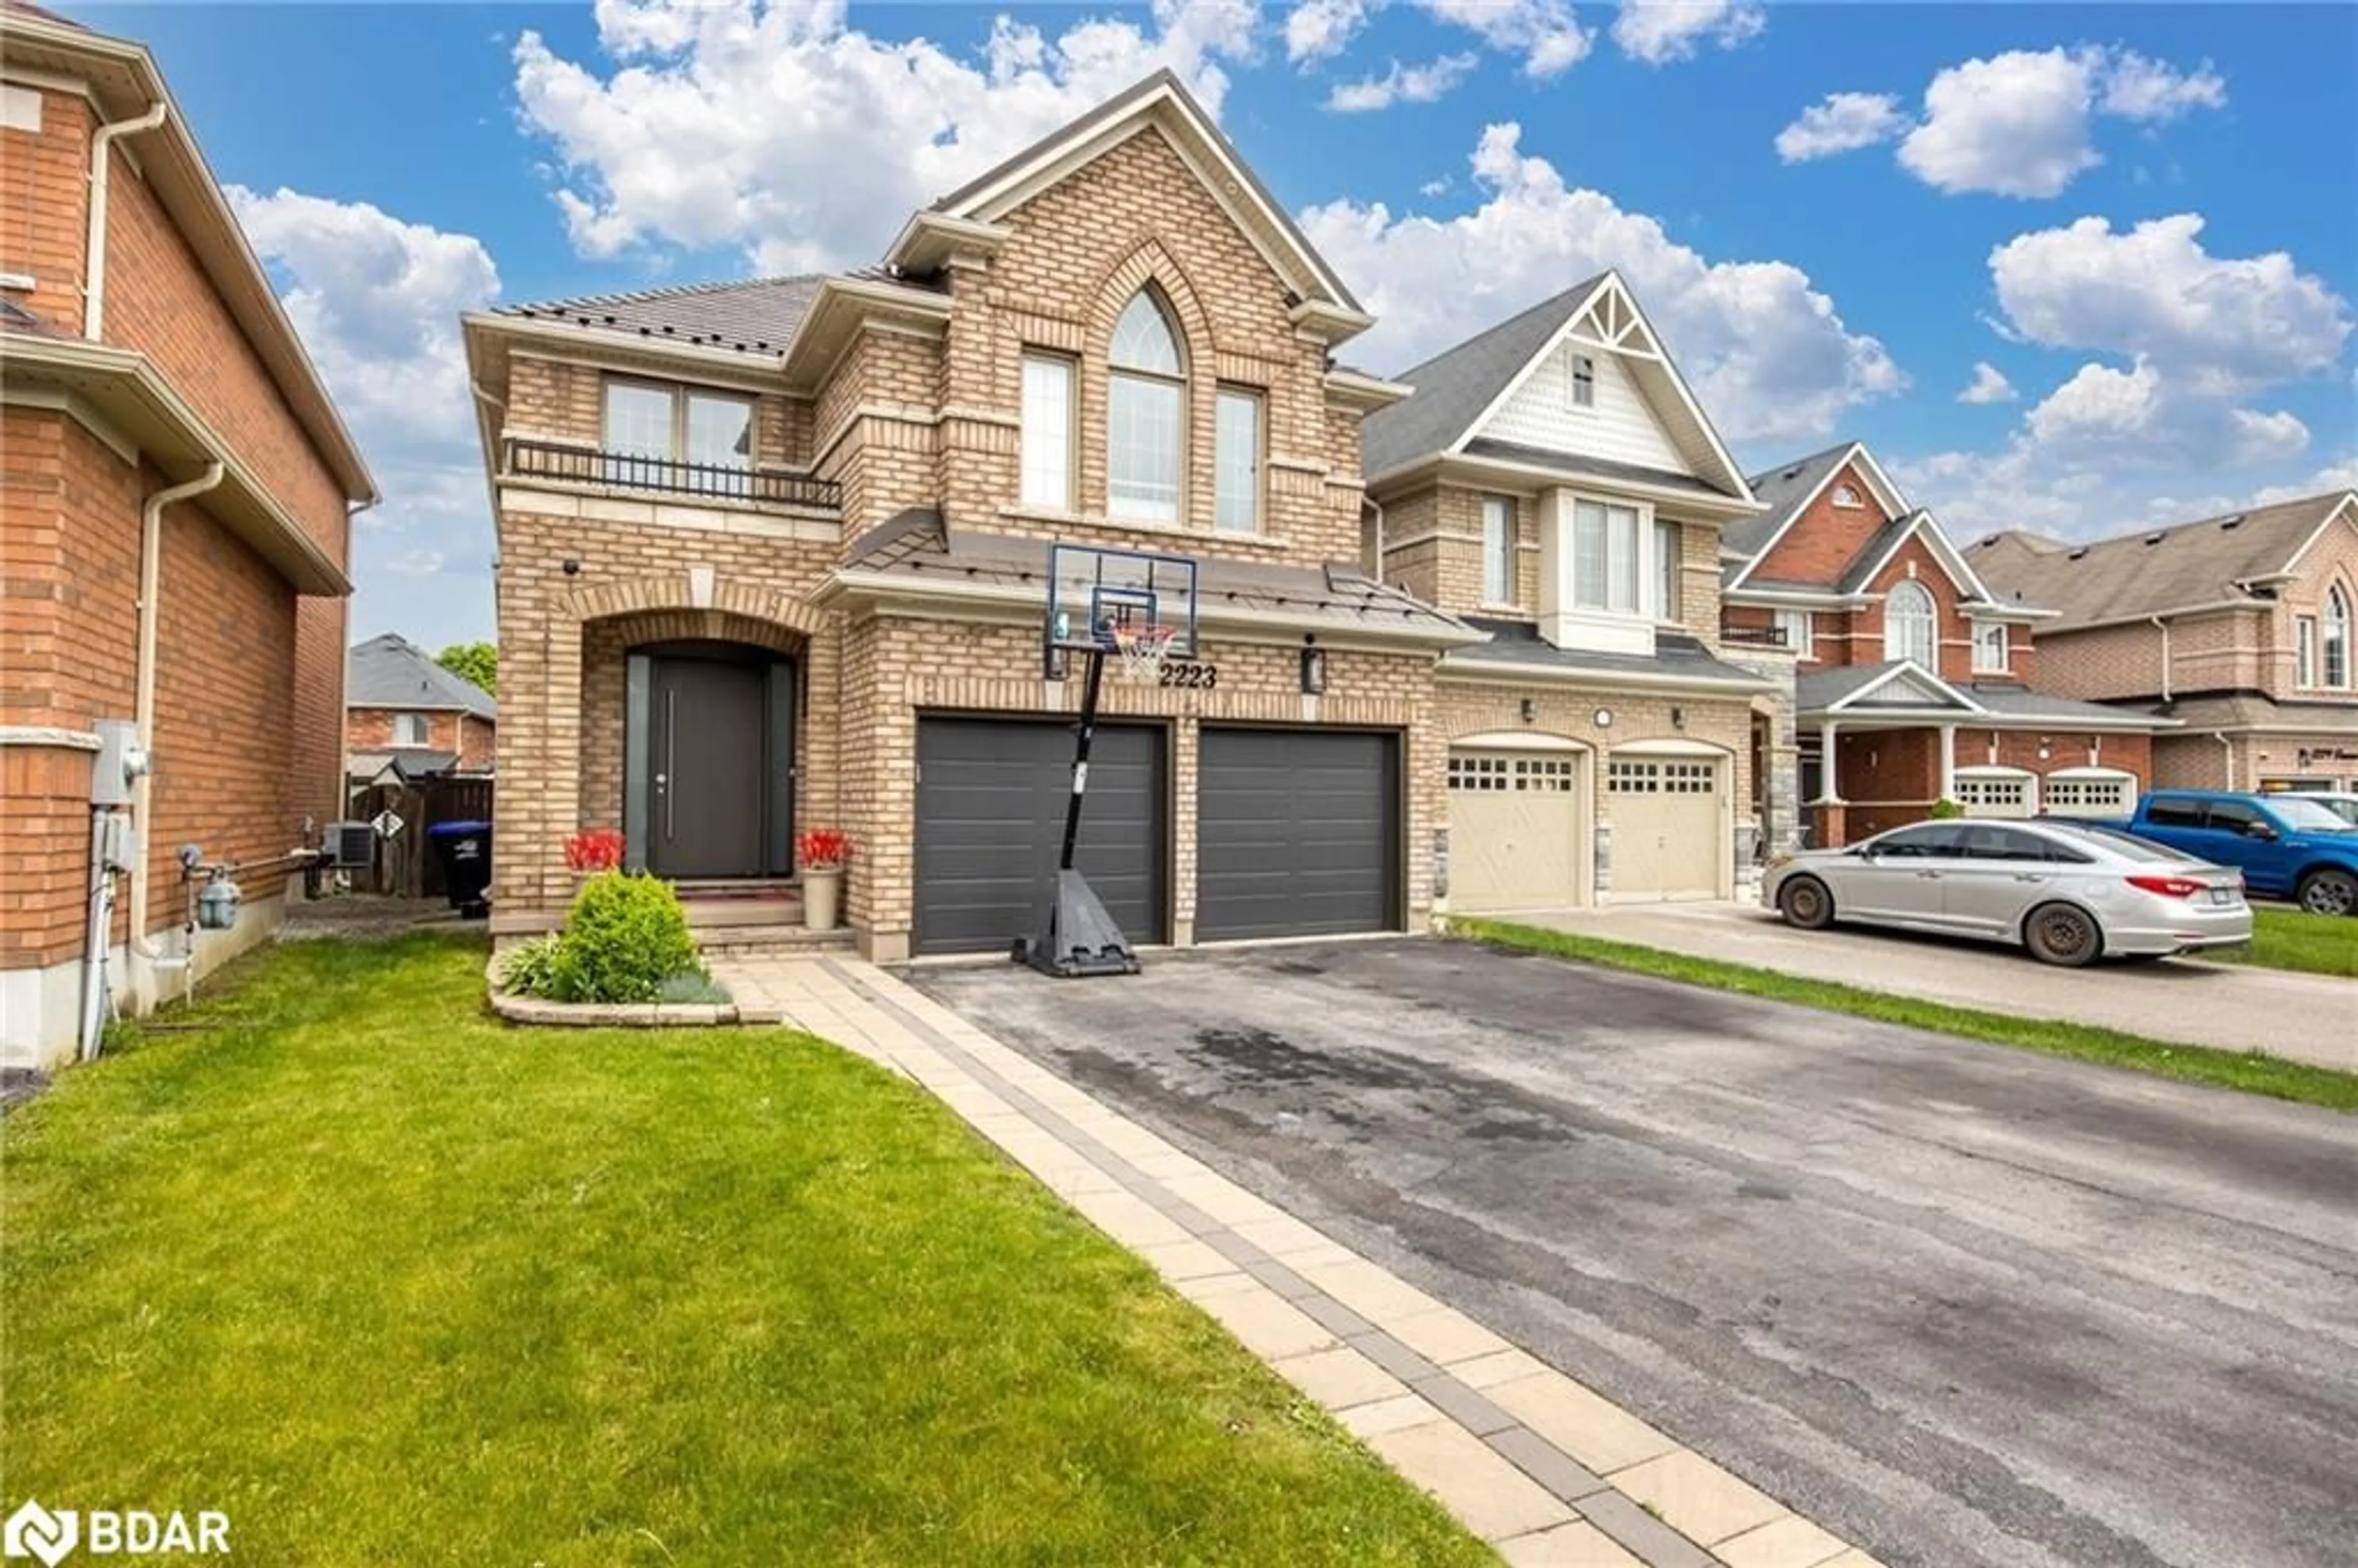 Home with brick exterior material for 2223 Dawson Crescent Cres, Innisfil Ontario L9S 0G9